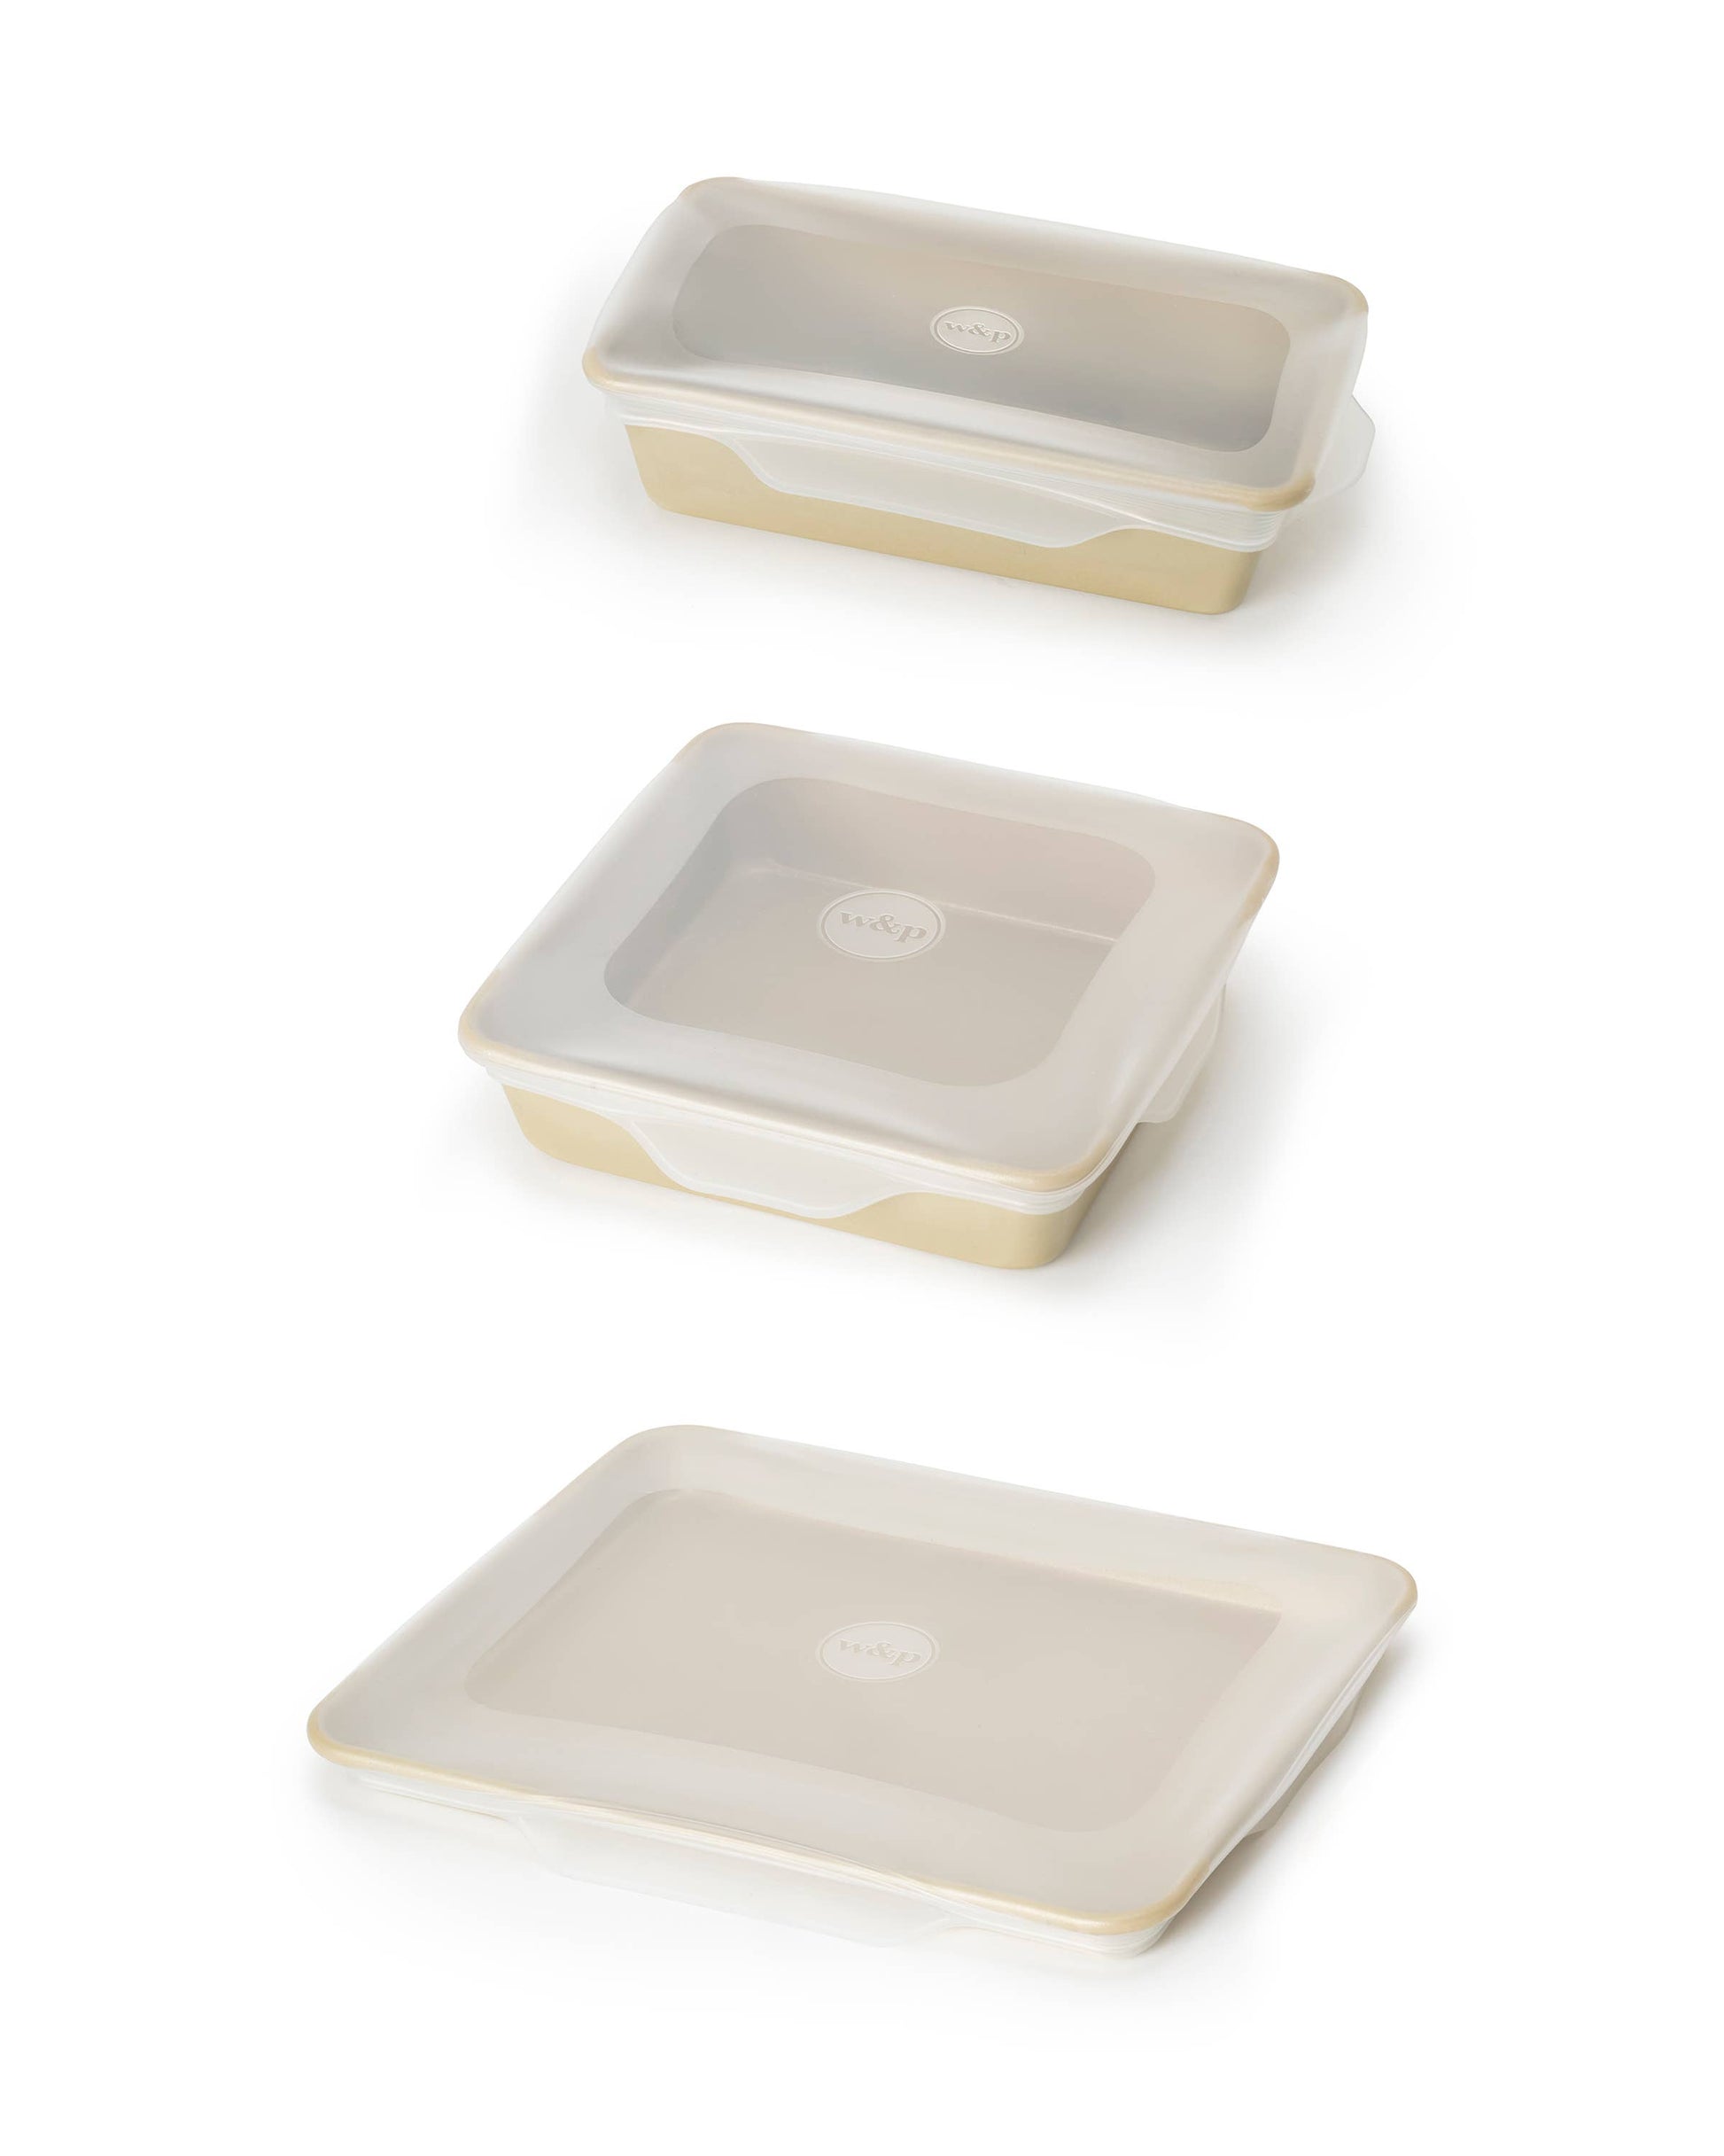 Reusable Silicone Stretch Baking Lids - Set of 3  W&P   -better made easy-eco-friendly-sustainable-gifting